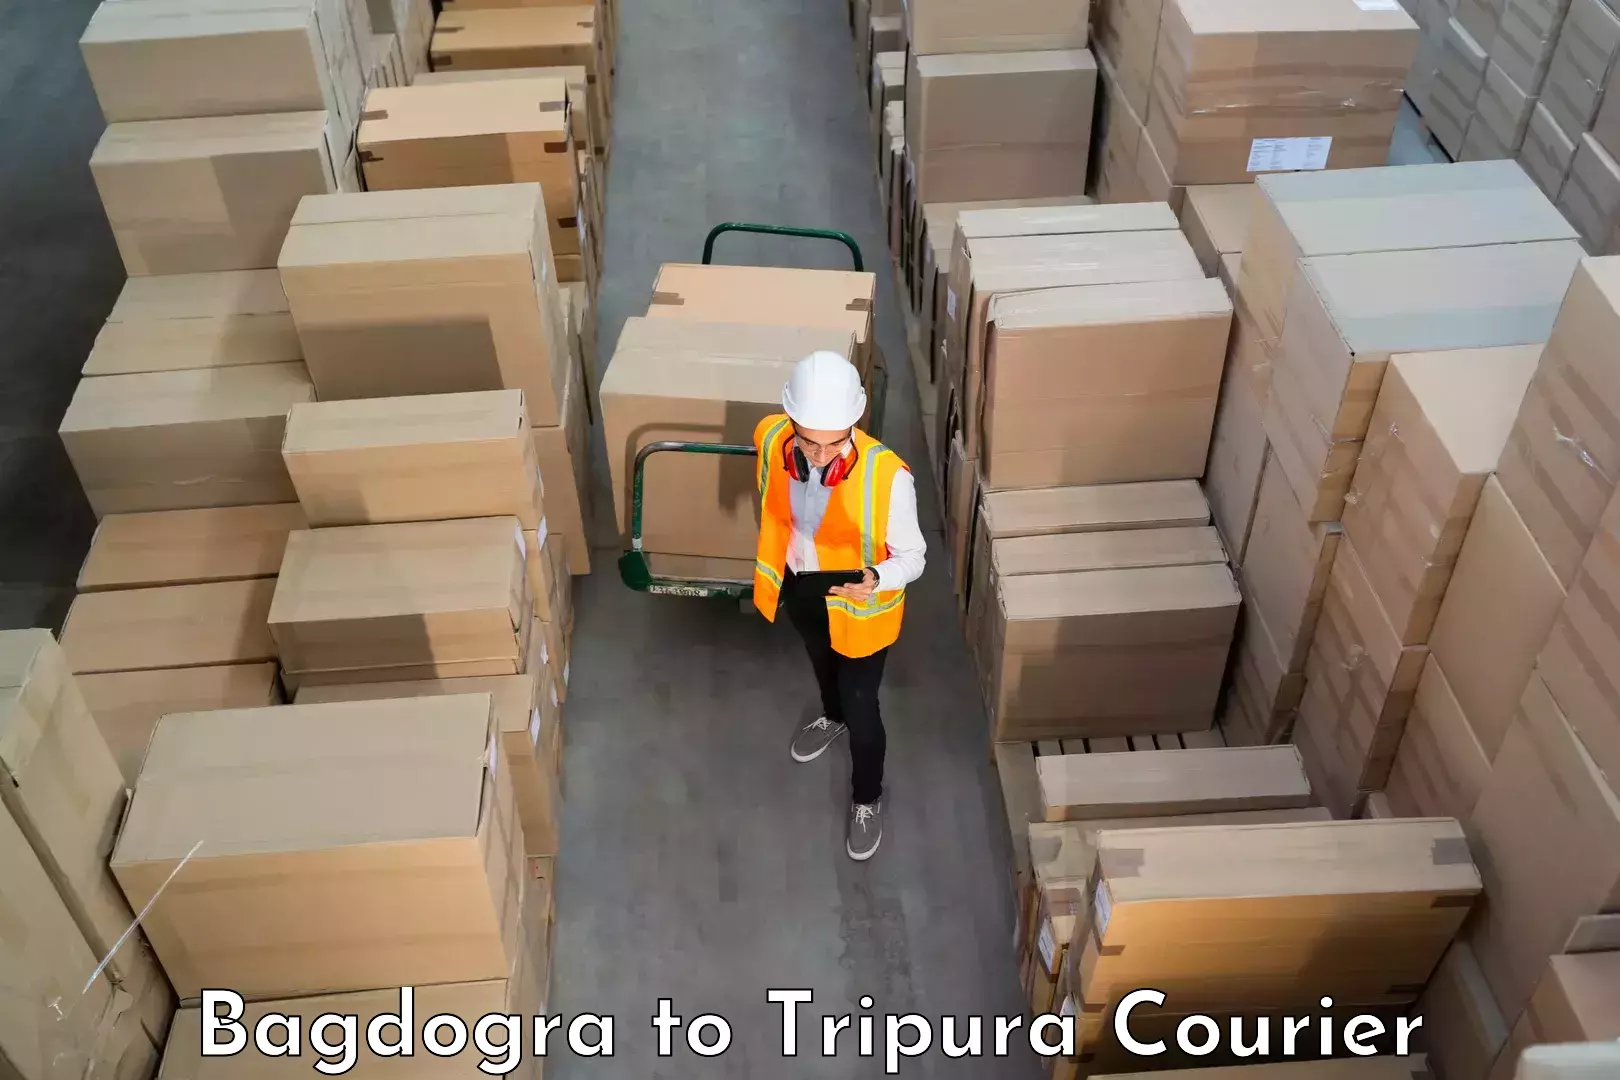 Trusted moving company Bagdogra to Tripura